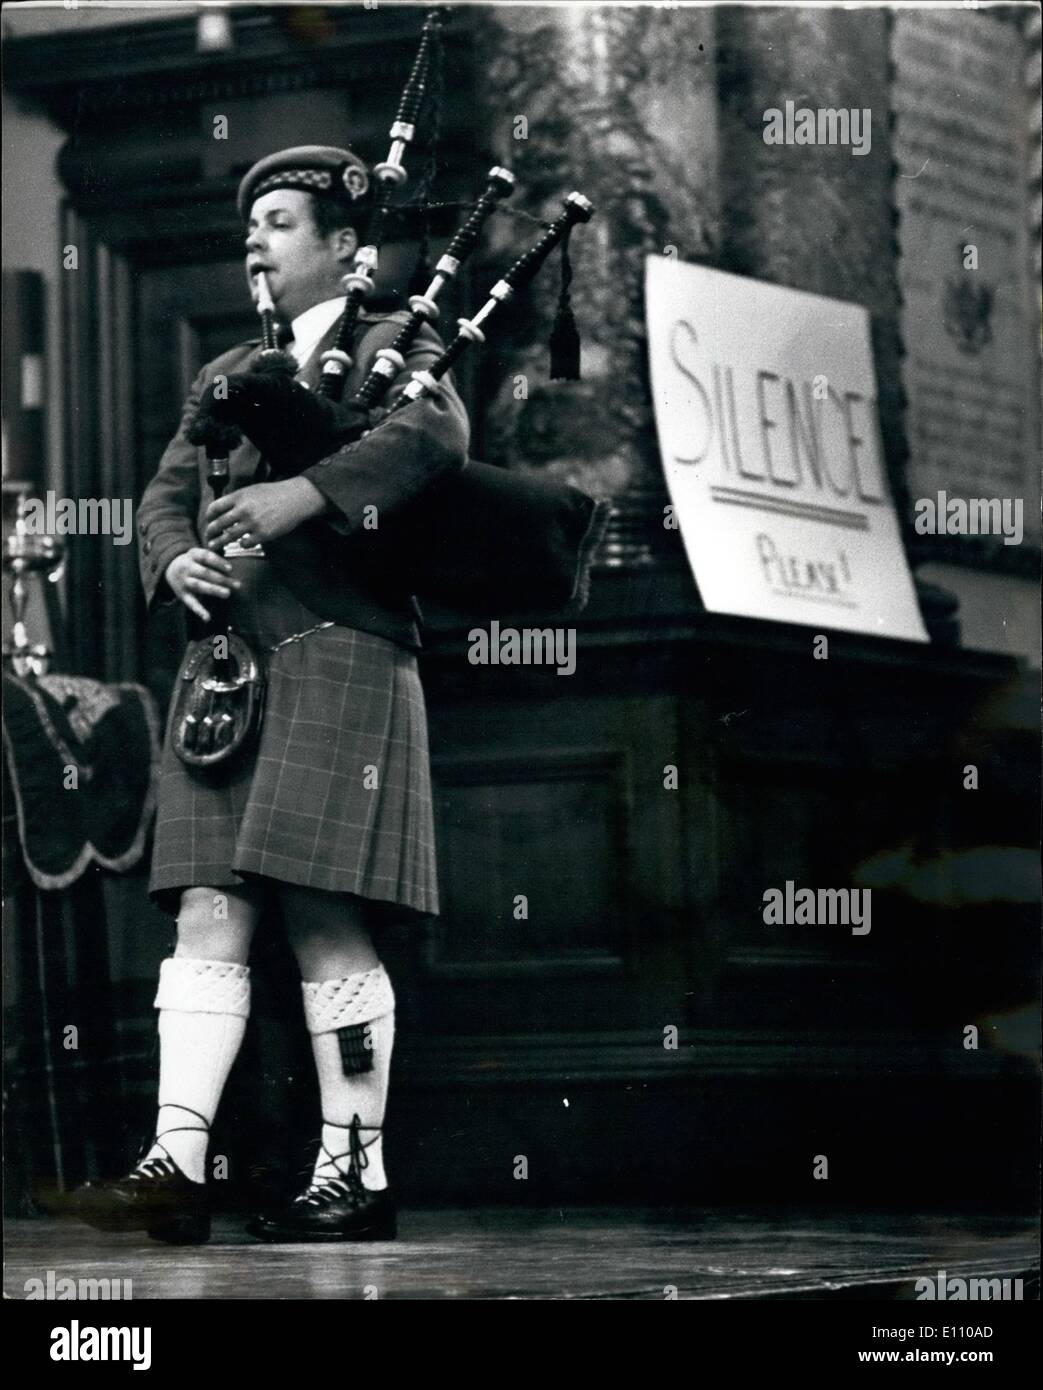 Nov. 11, 1974 - Annual competition of Scottish Piping society. the annual competitions of the Scittish Piping society of London, were being held today at Chelsea town hall. Photo shows:- K. MacDonald, of Glasgow, competeing in the Bratach Gorm (known as the Doctor Calum MacCrimmon Bratach Gorm challenge trophy), one of the most coveted awards in piping. Obviously The 'silence please' notice didn't apply to him. Stock Photo